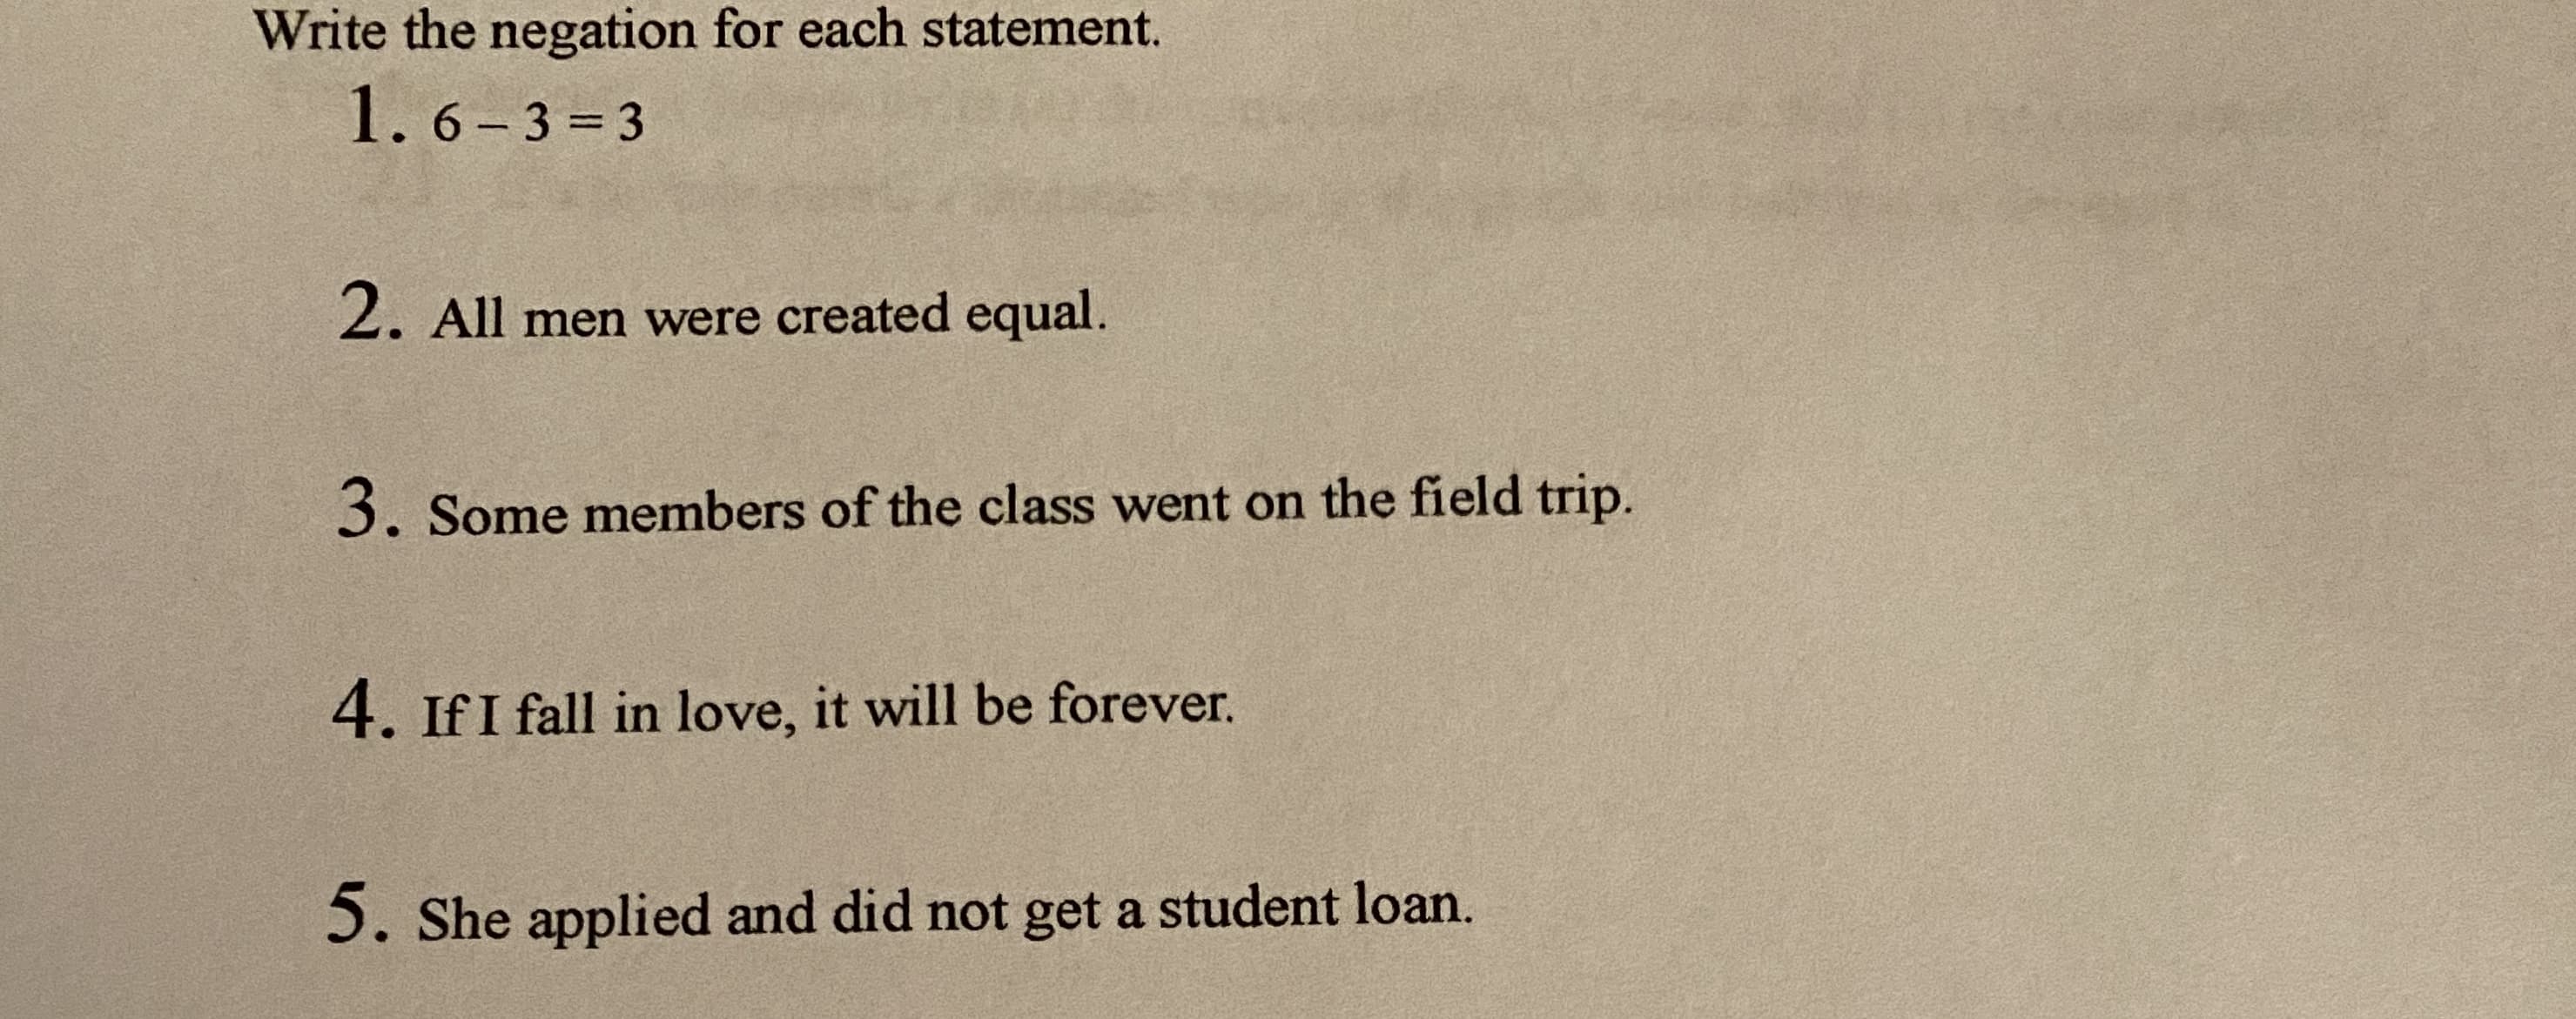 Write the negation for each statement.
1. 6- 3 = 3
%3D
2. All men were created equal.
3. Some members of the class went on the field trip.
4. If I fall in love, it will be forever.
5. She applied and did not get a student loan.
